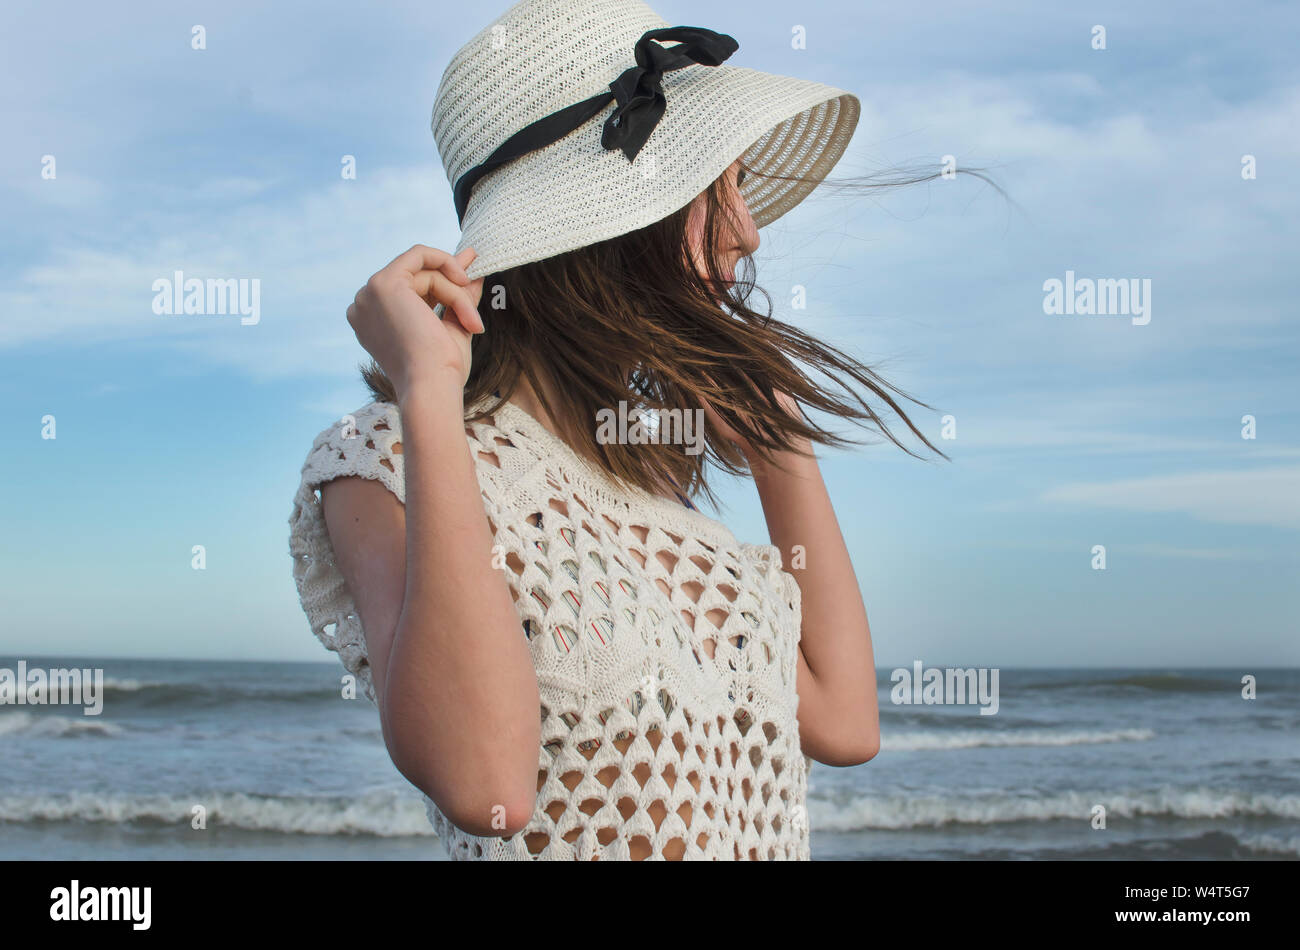 Teenage girl standing on beach holding her hat, Argentina Stock Photo